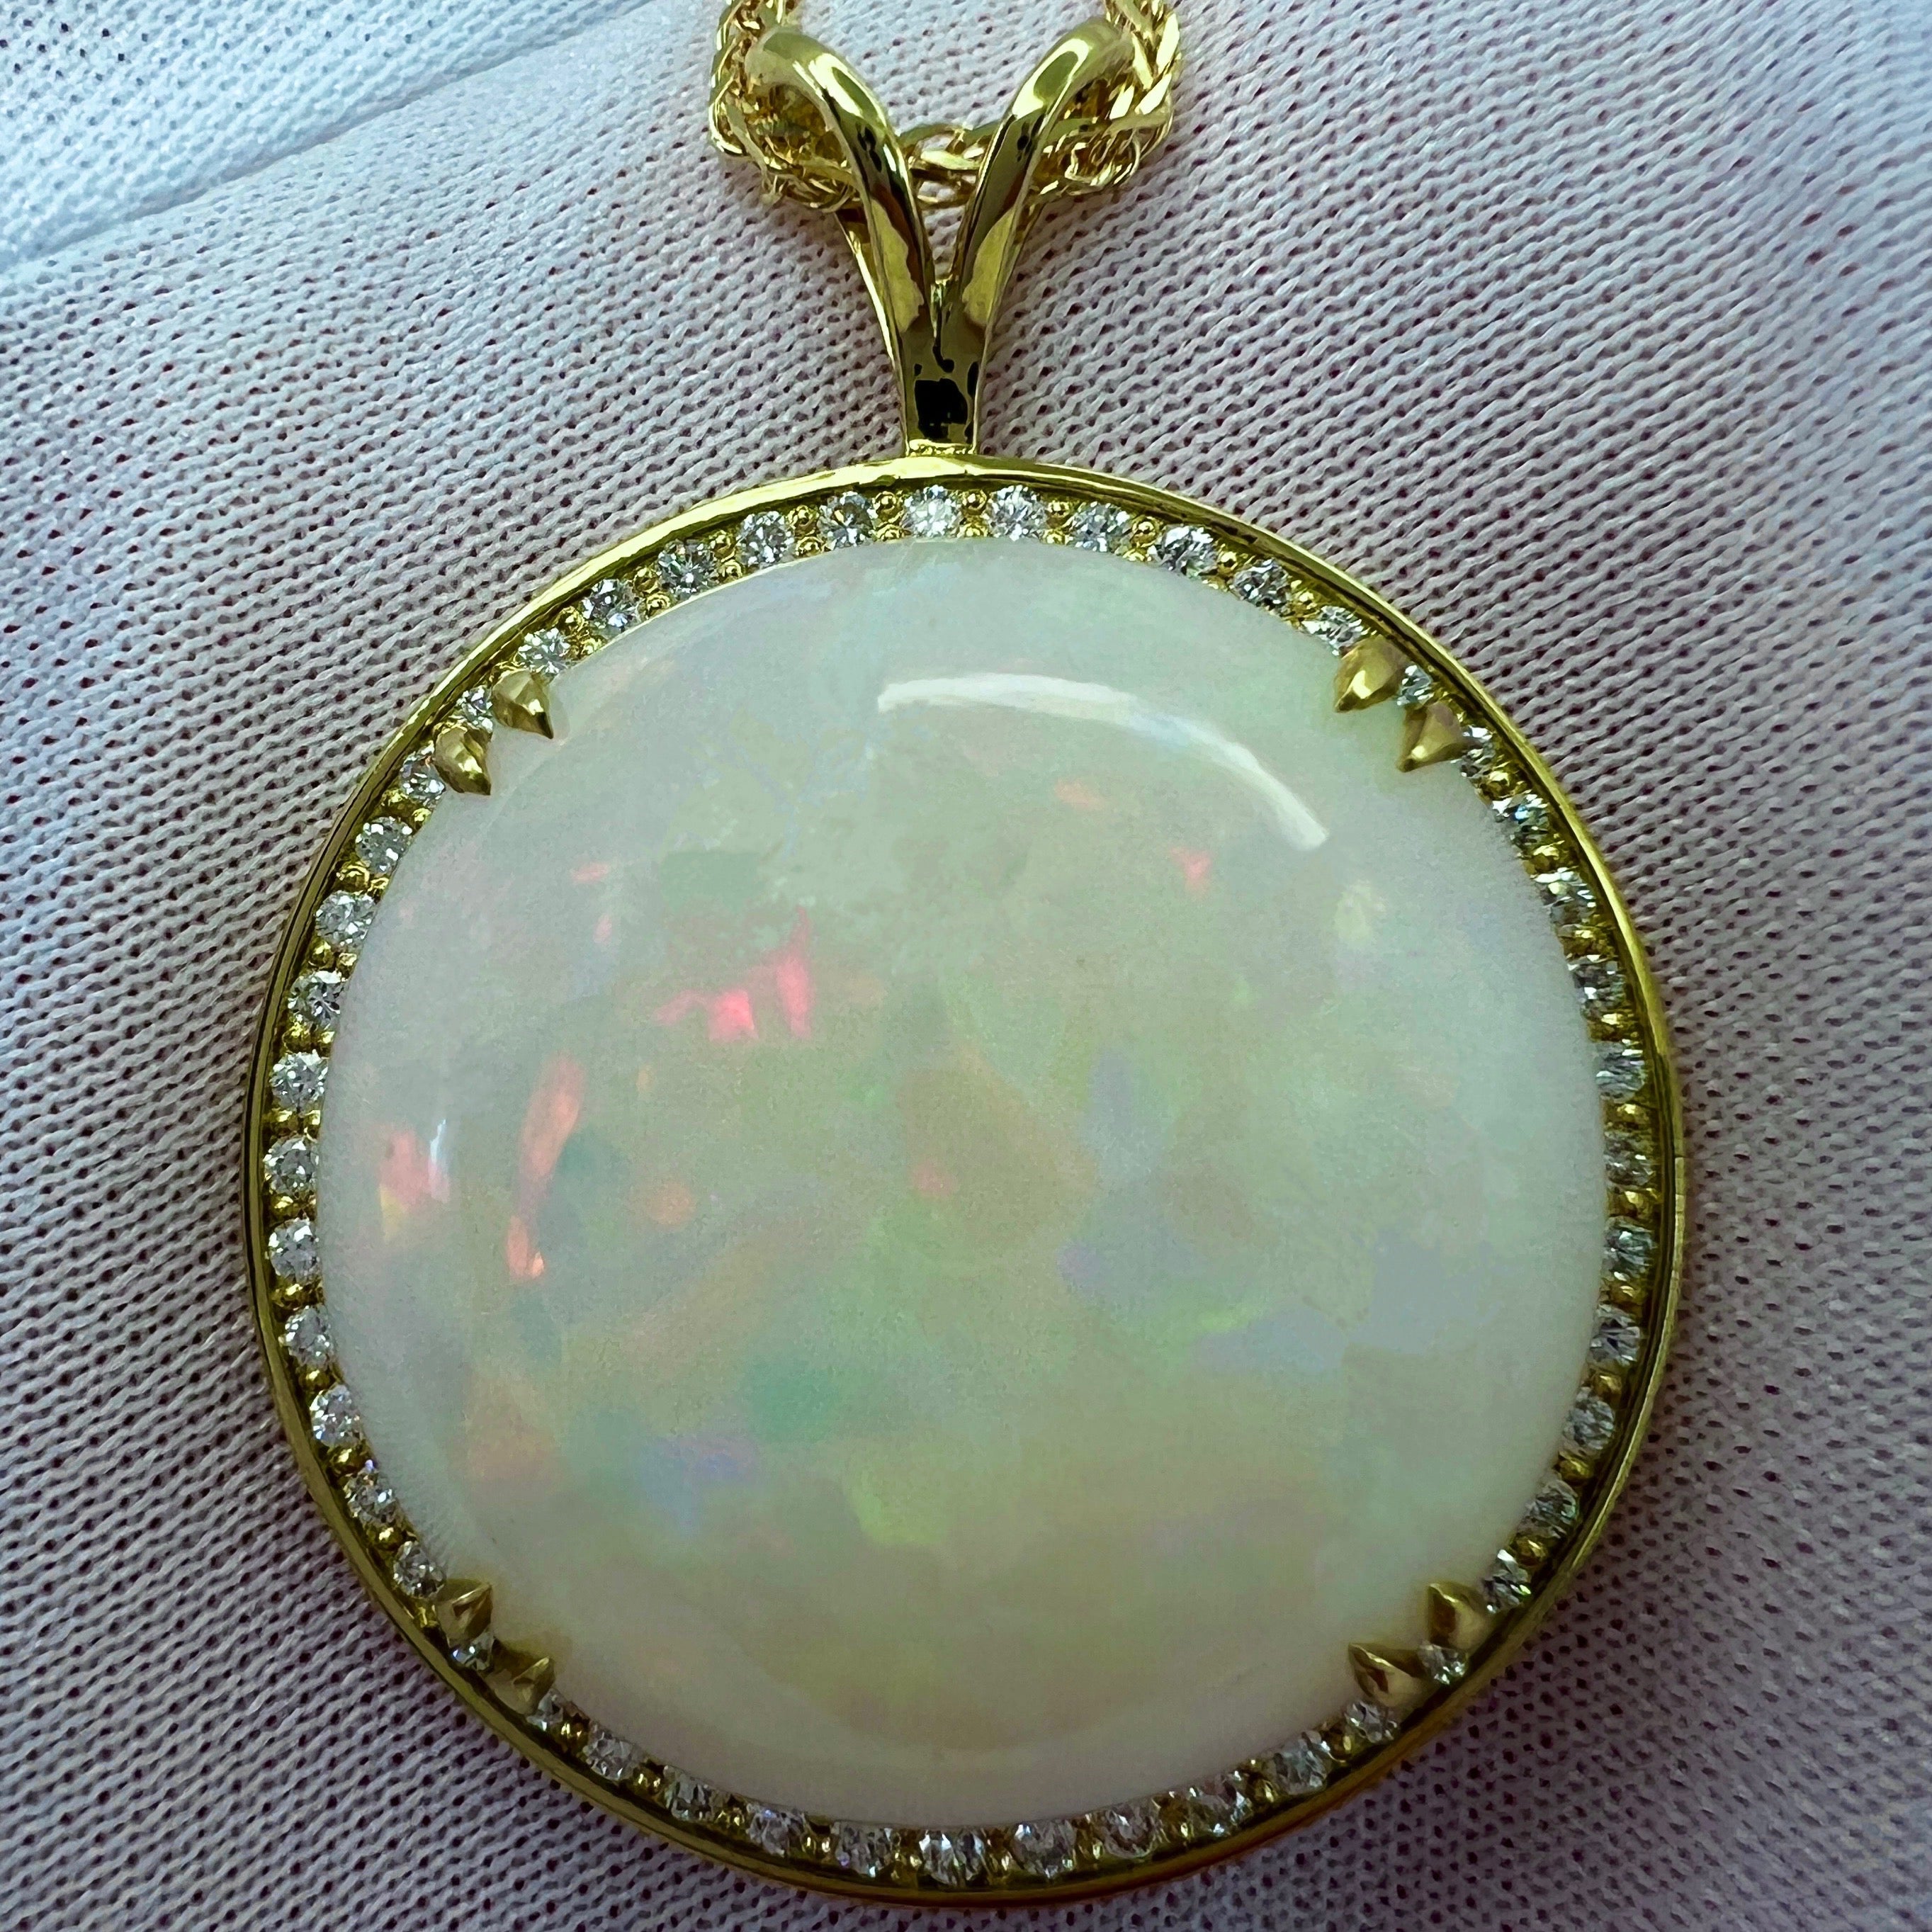 Top Grade Round Cabochon White Opal & Diamond 18k Yellow Gold Pendant Necklace.

Large 33.17 Carat opal with beautiful play of colour, lots of colour flashes. Blues, greens, oranges, yellow, purple, reds... this stone is filled with colour! 

Very